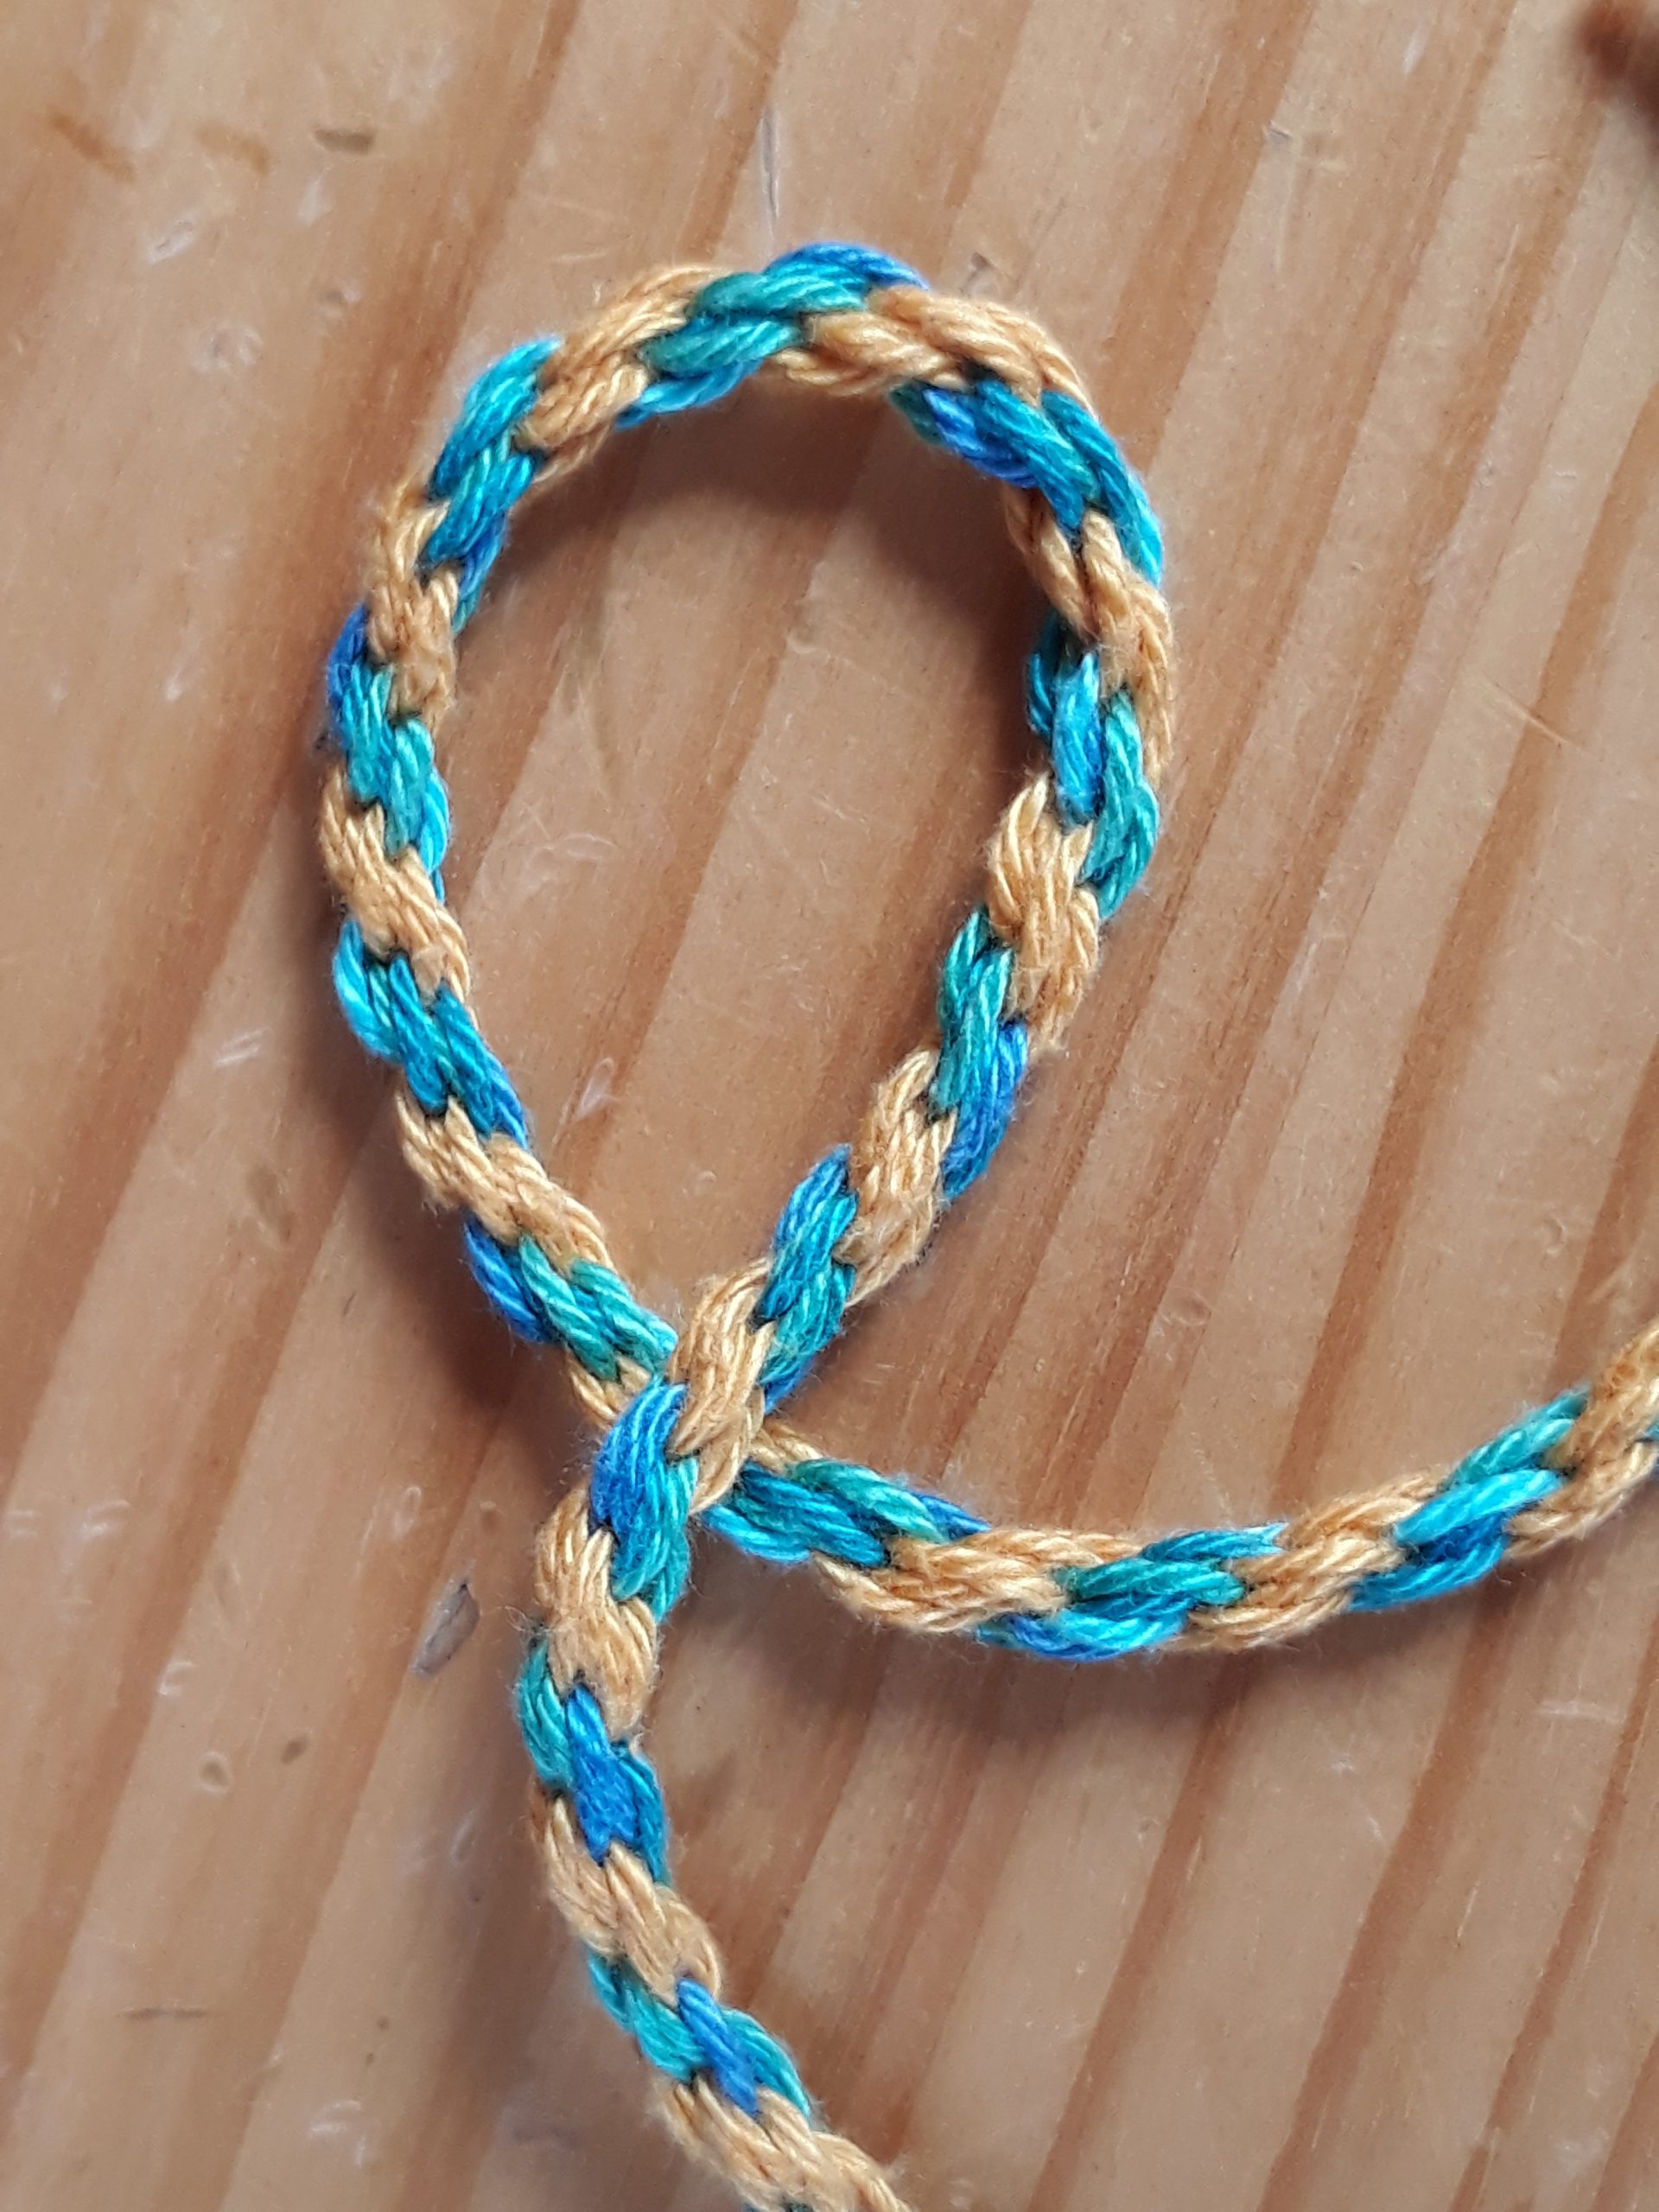 Picture of a braid with a spiral pattern